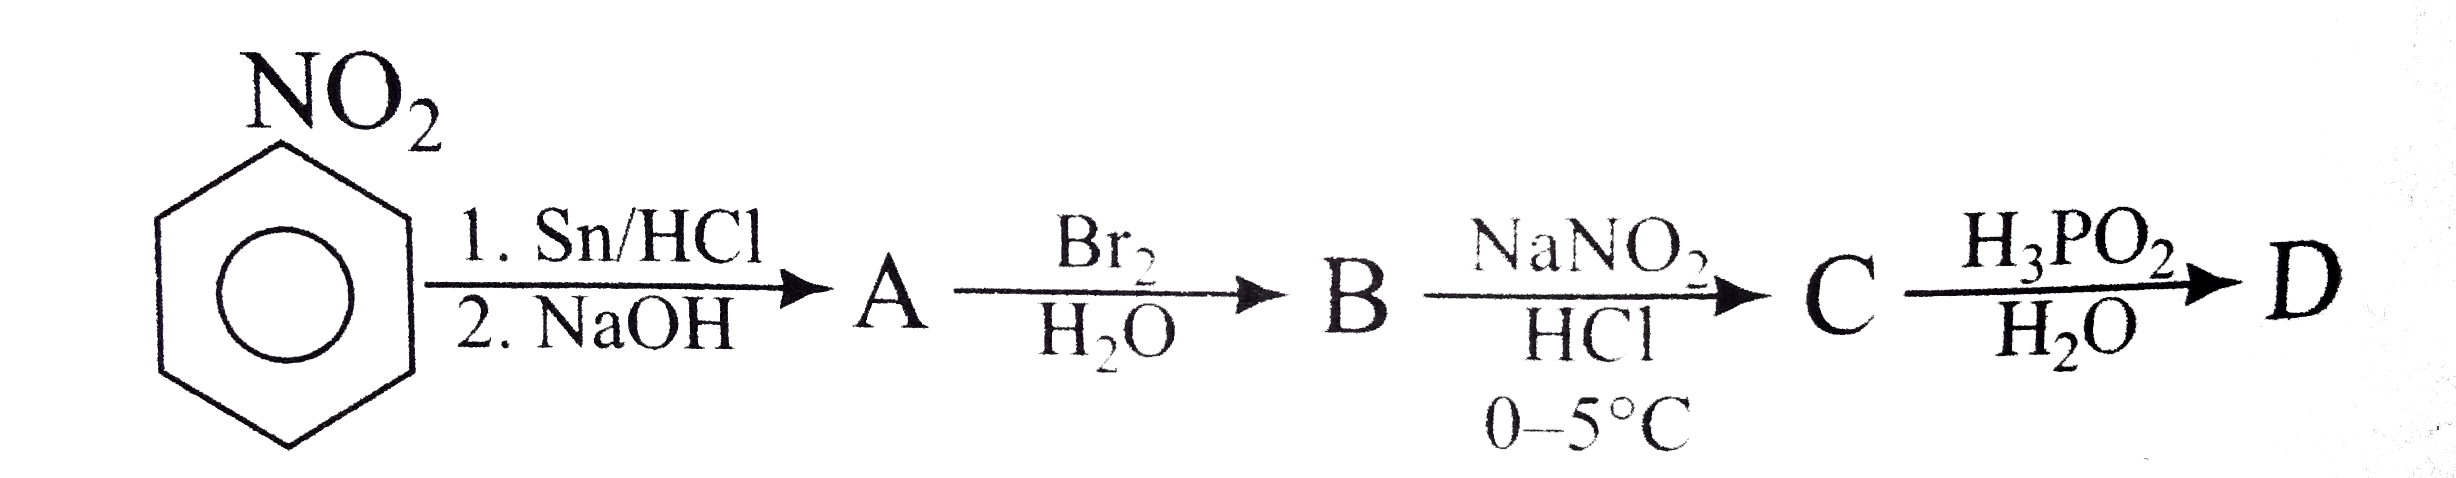 Predict the final product of the following sequence of reactions